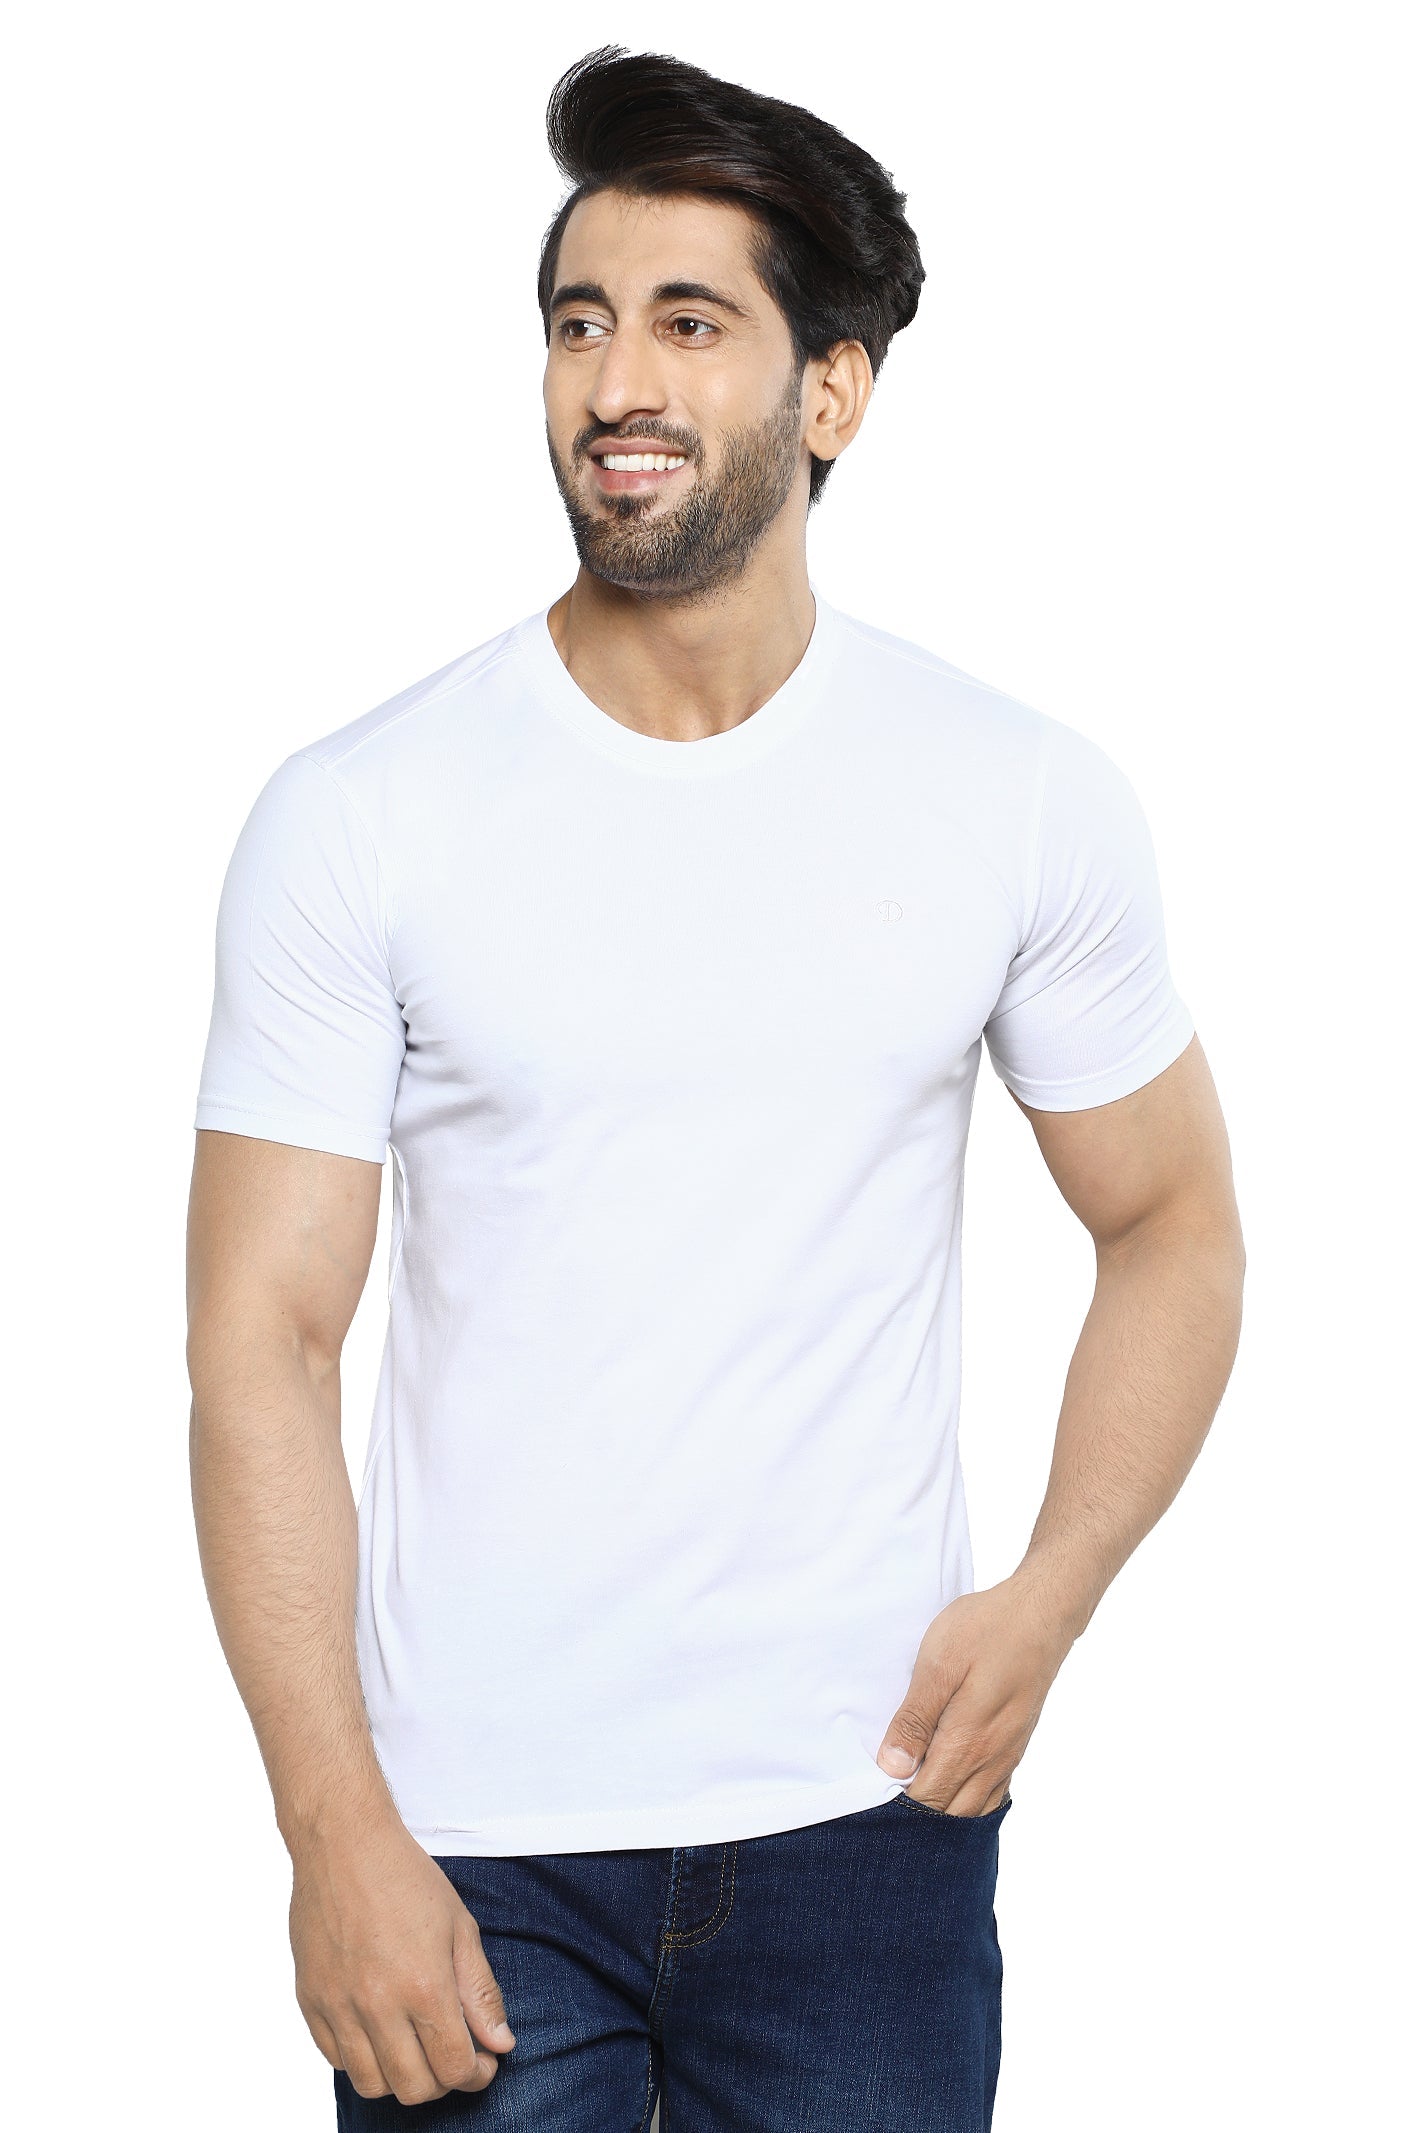 Diners Men's Round Neck T-Shirt SKU: NA856-WHITE - Diners